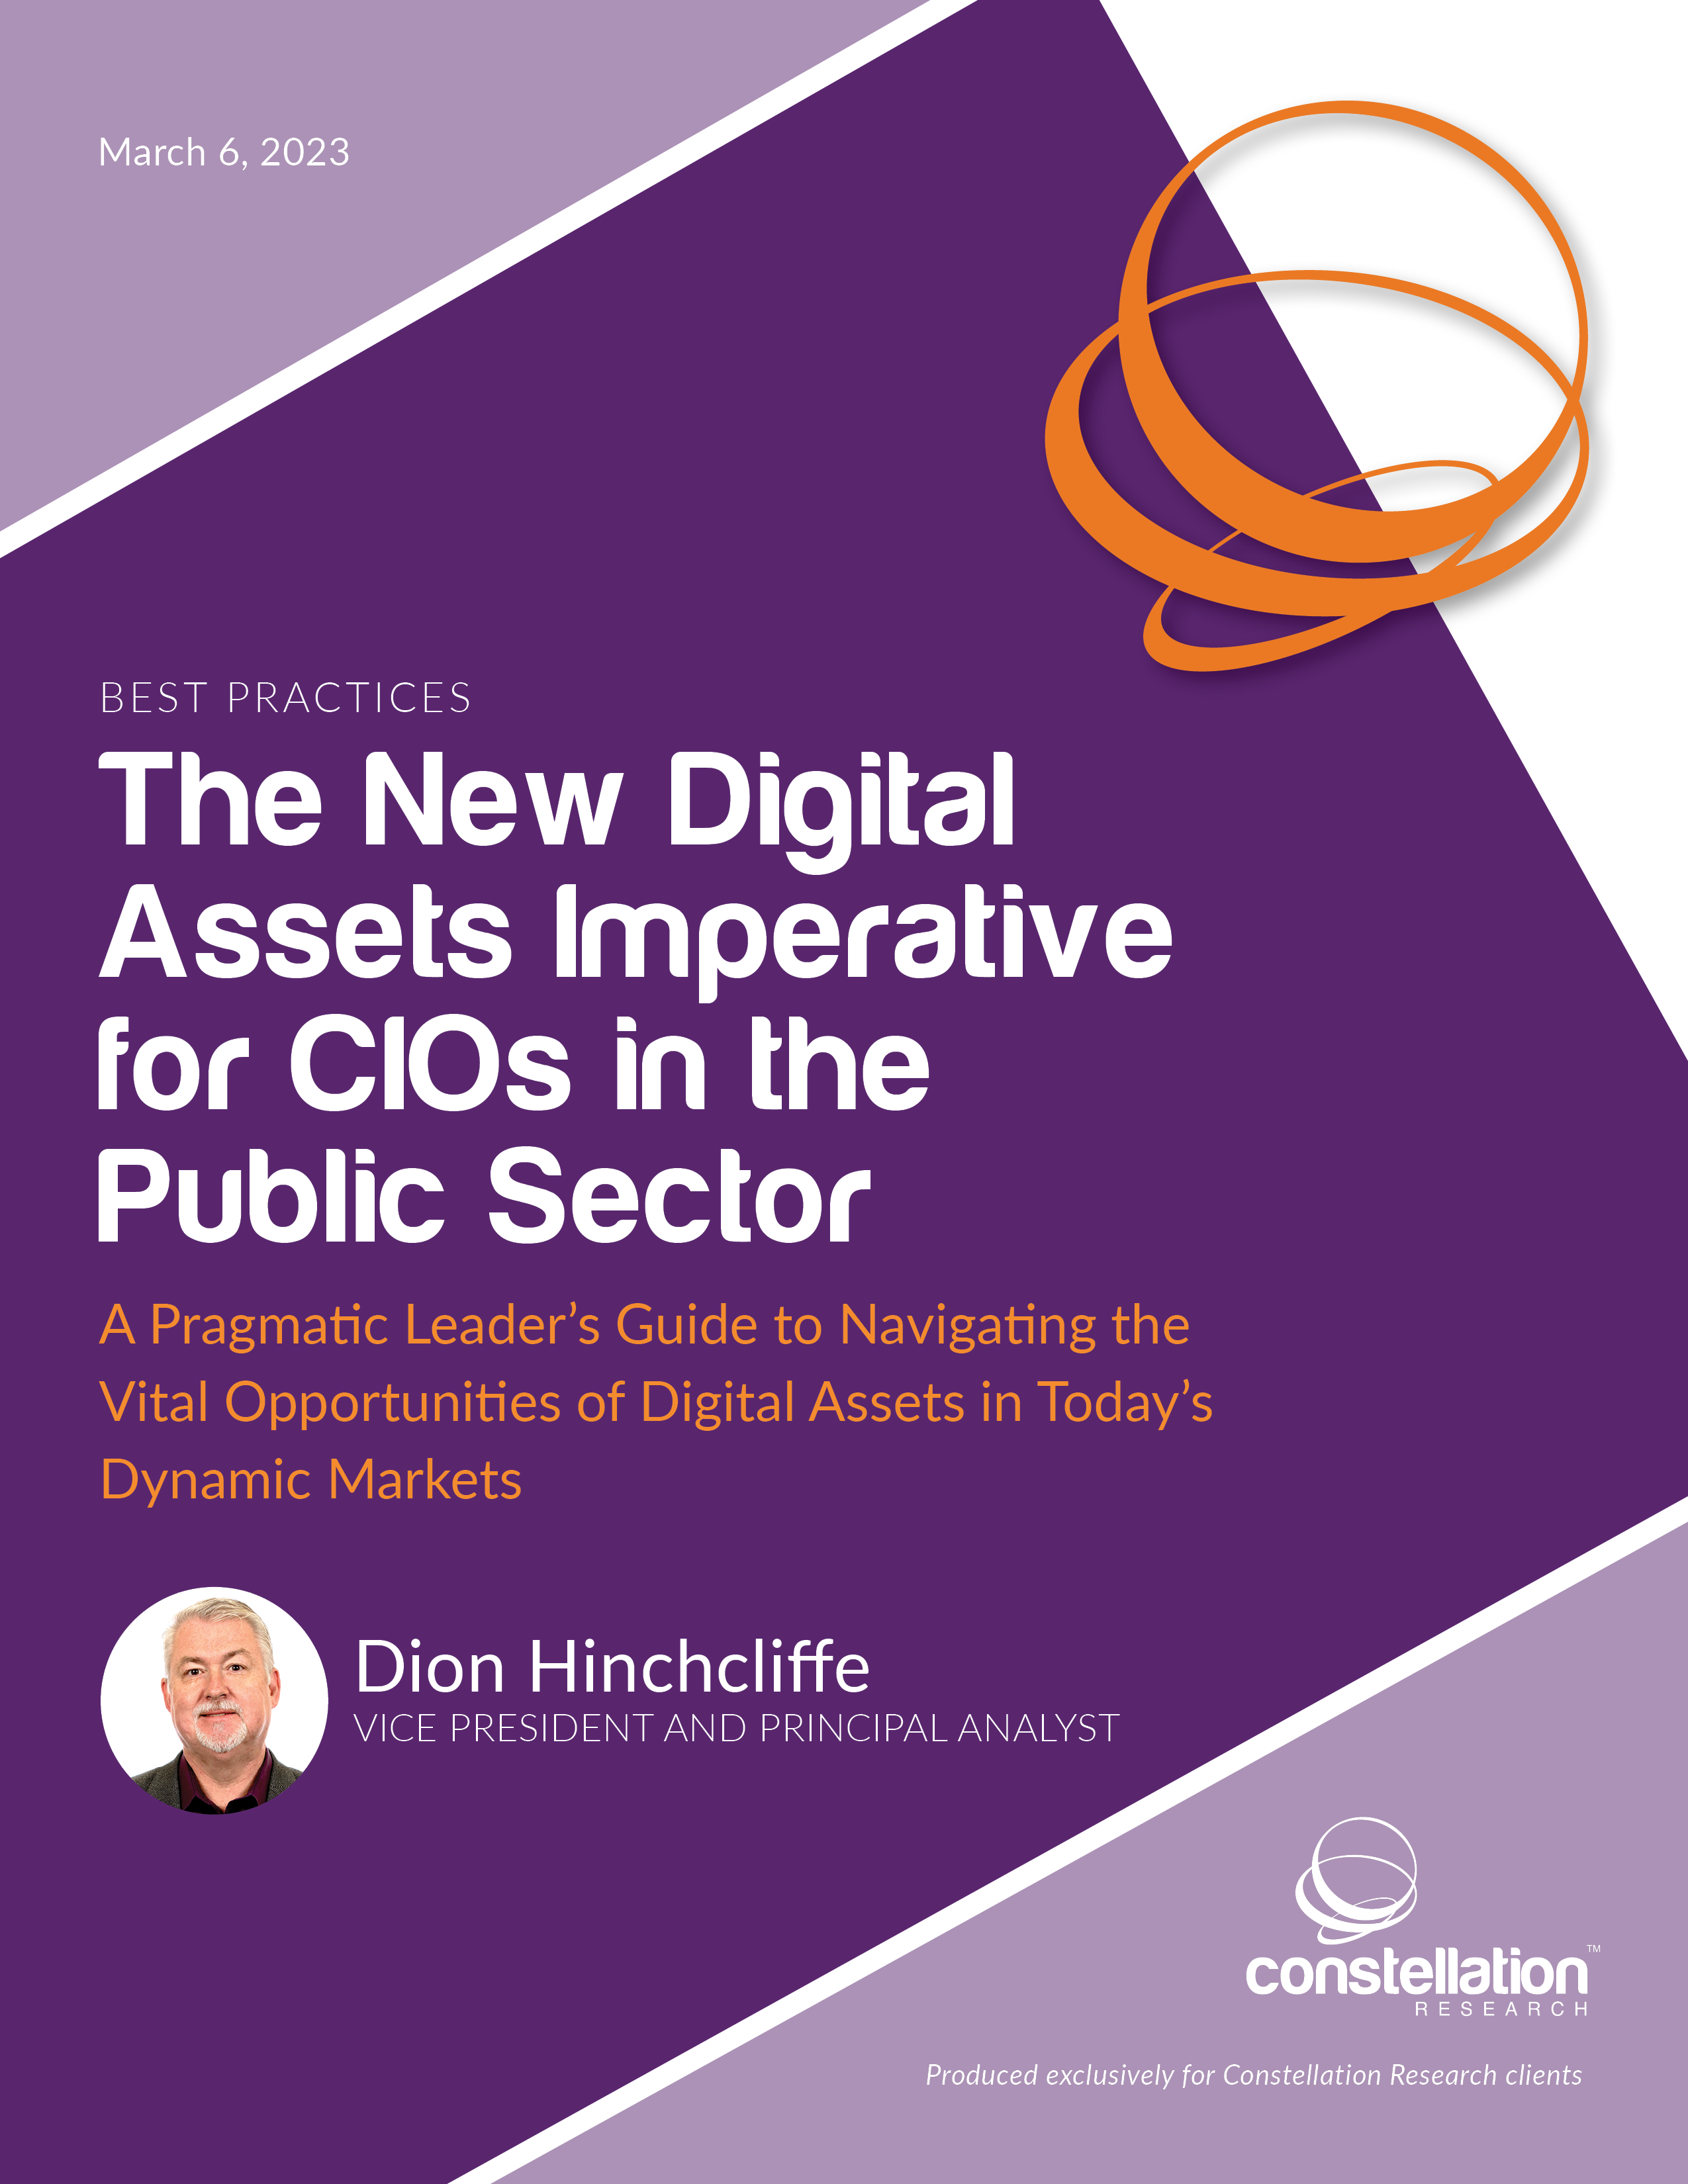 The New Digital Assets Imperative for CIOs in the Public Sector